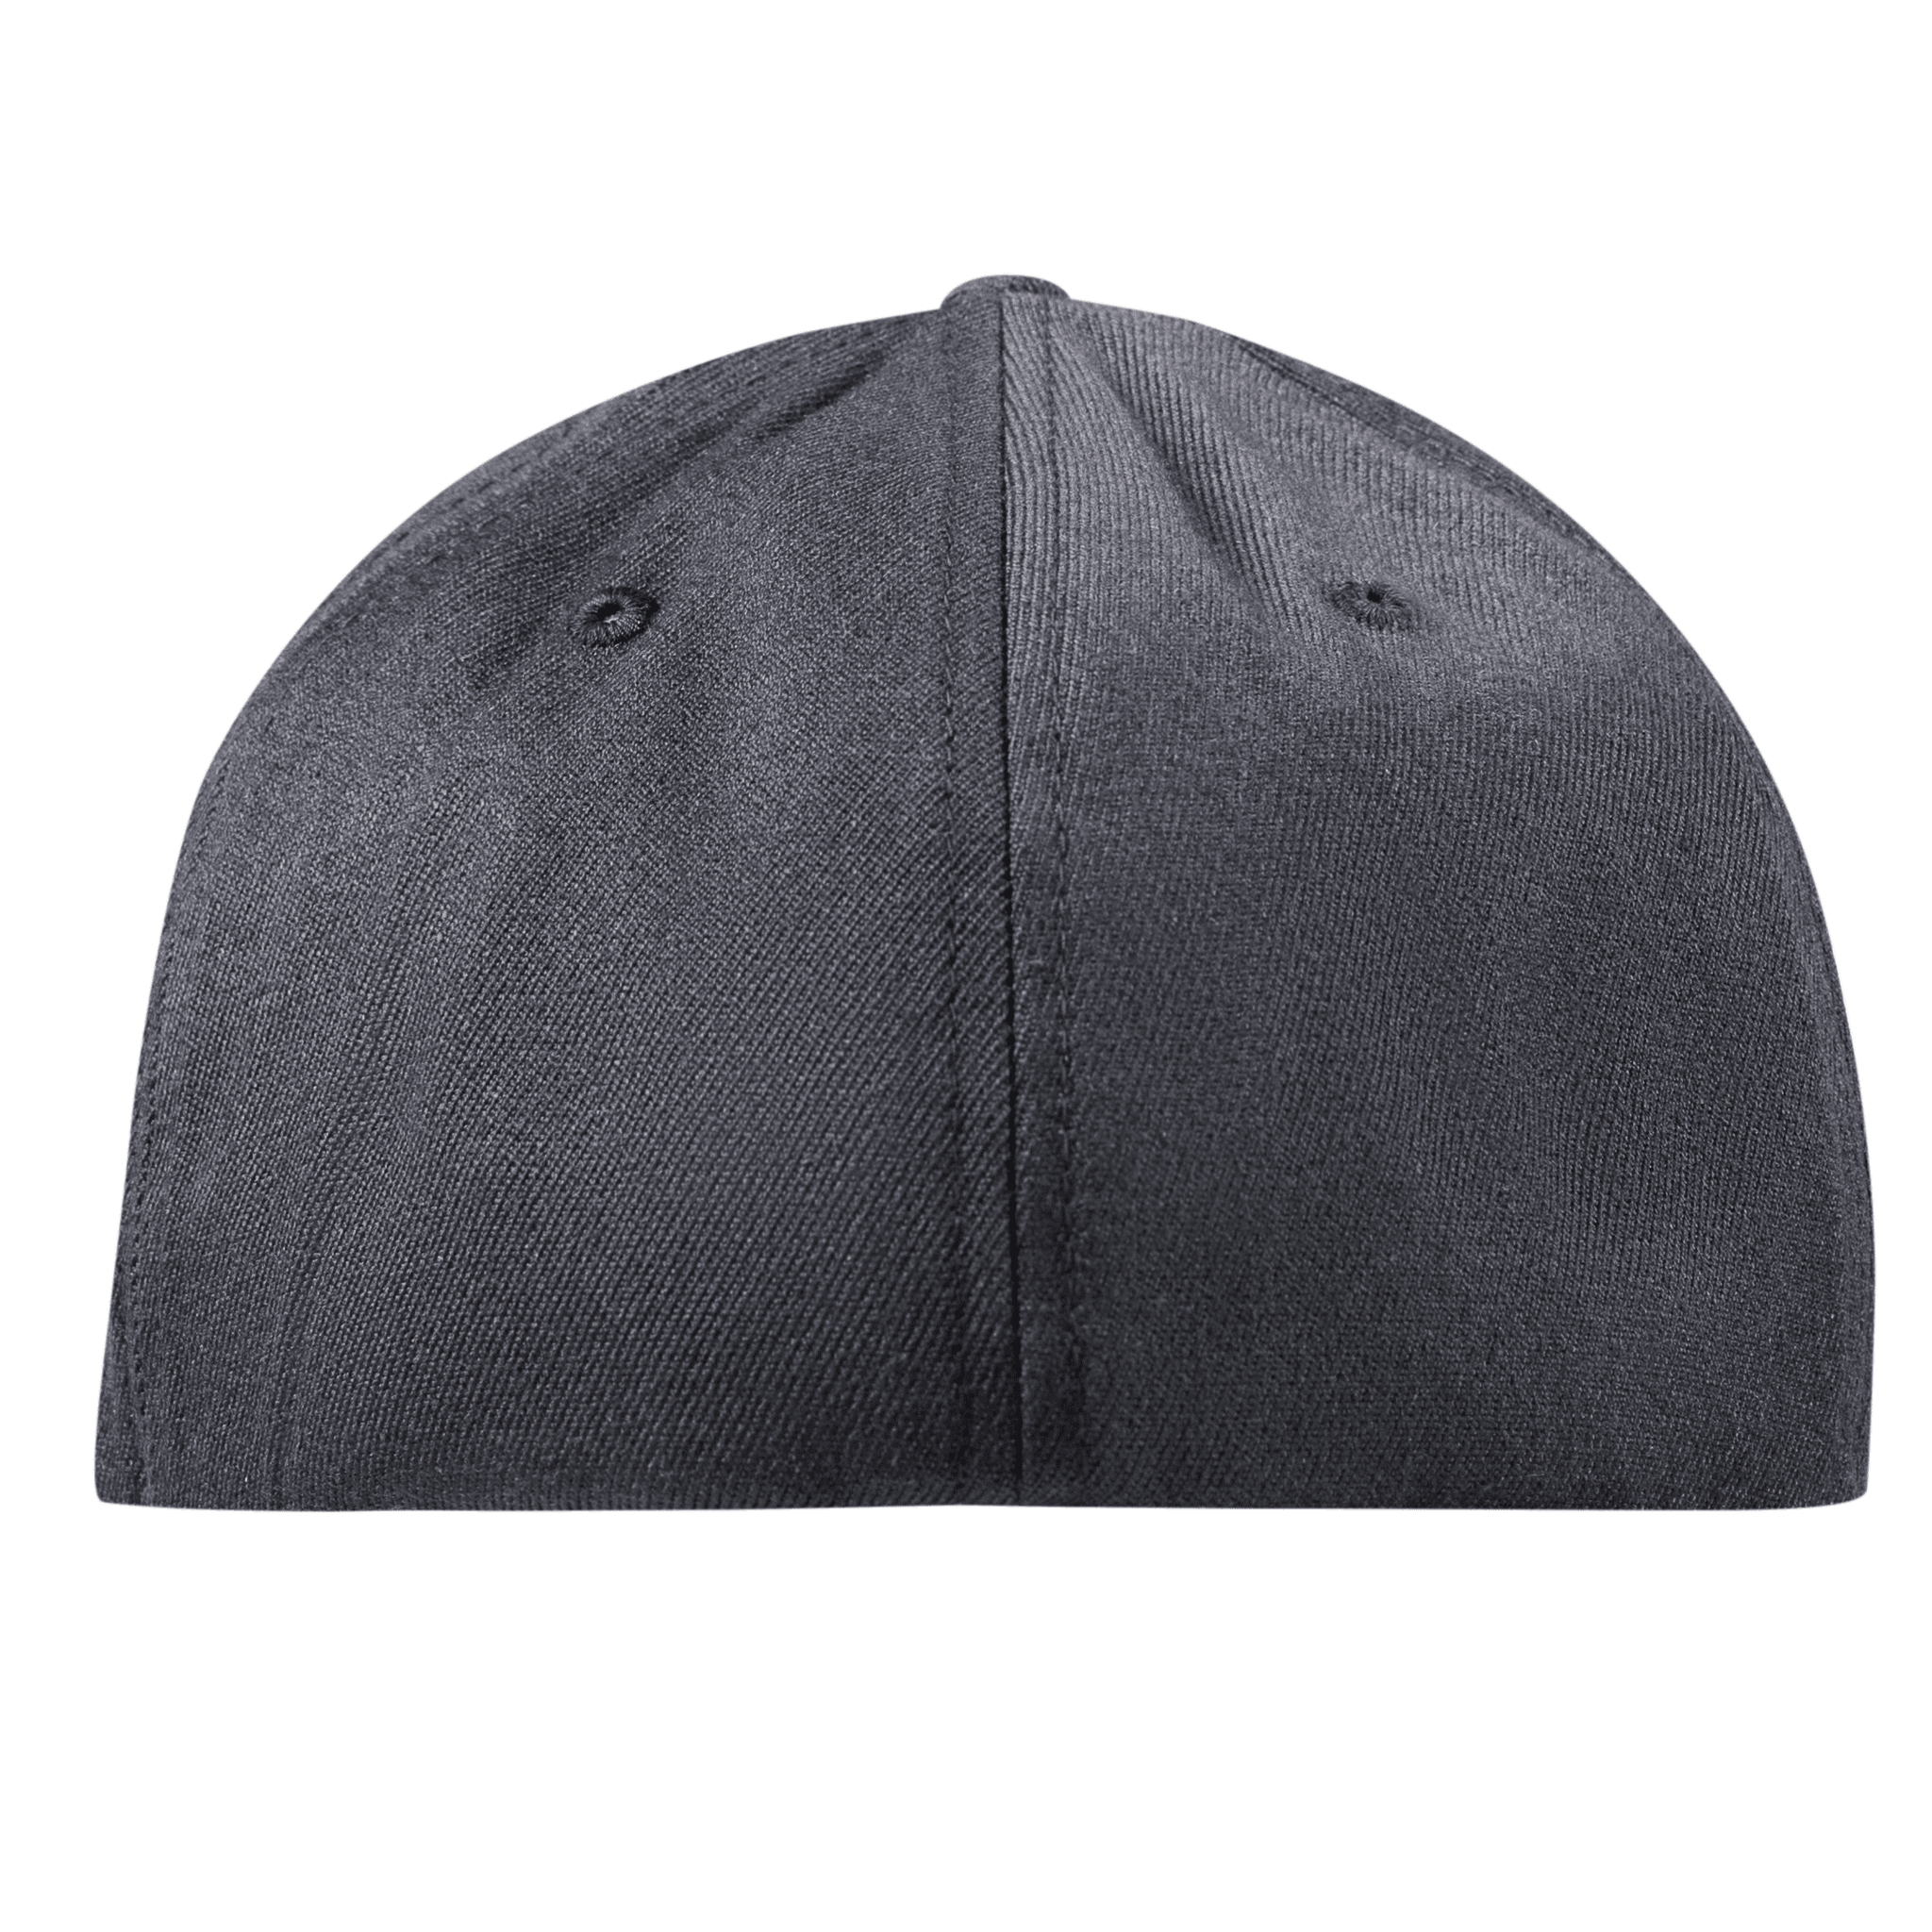 South Carolina 8 Flexfit Fitted Back Charcoal